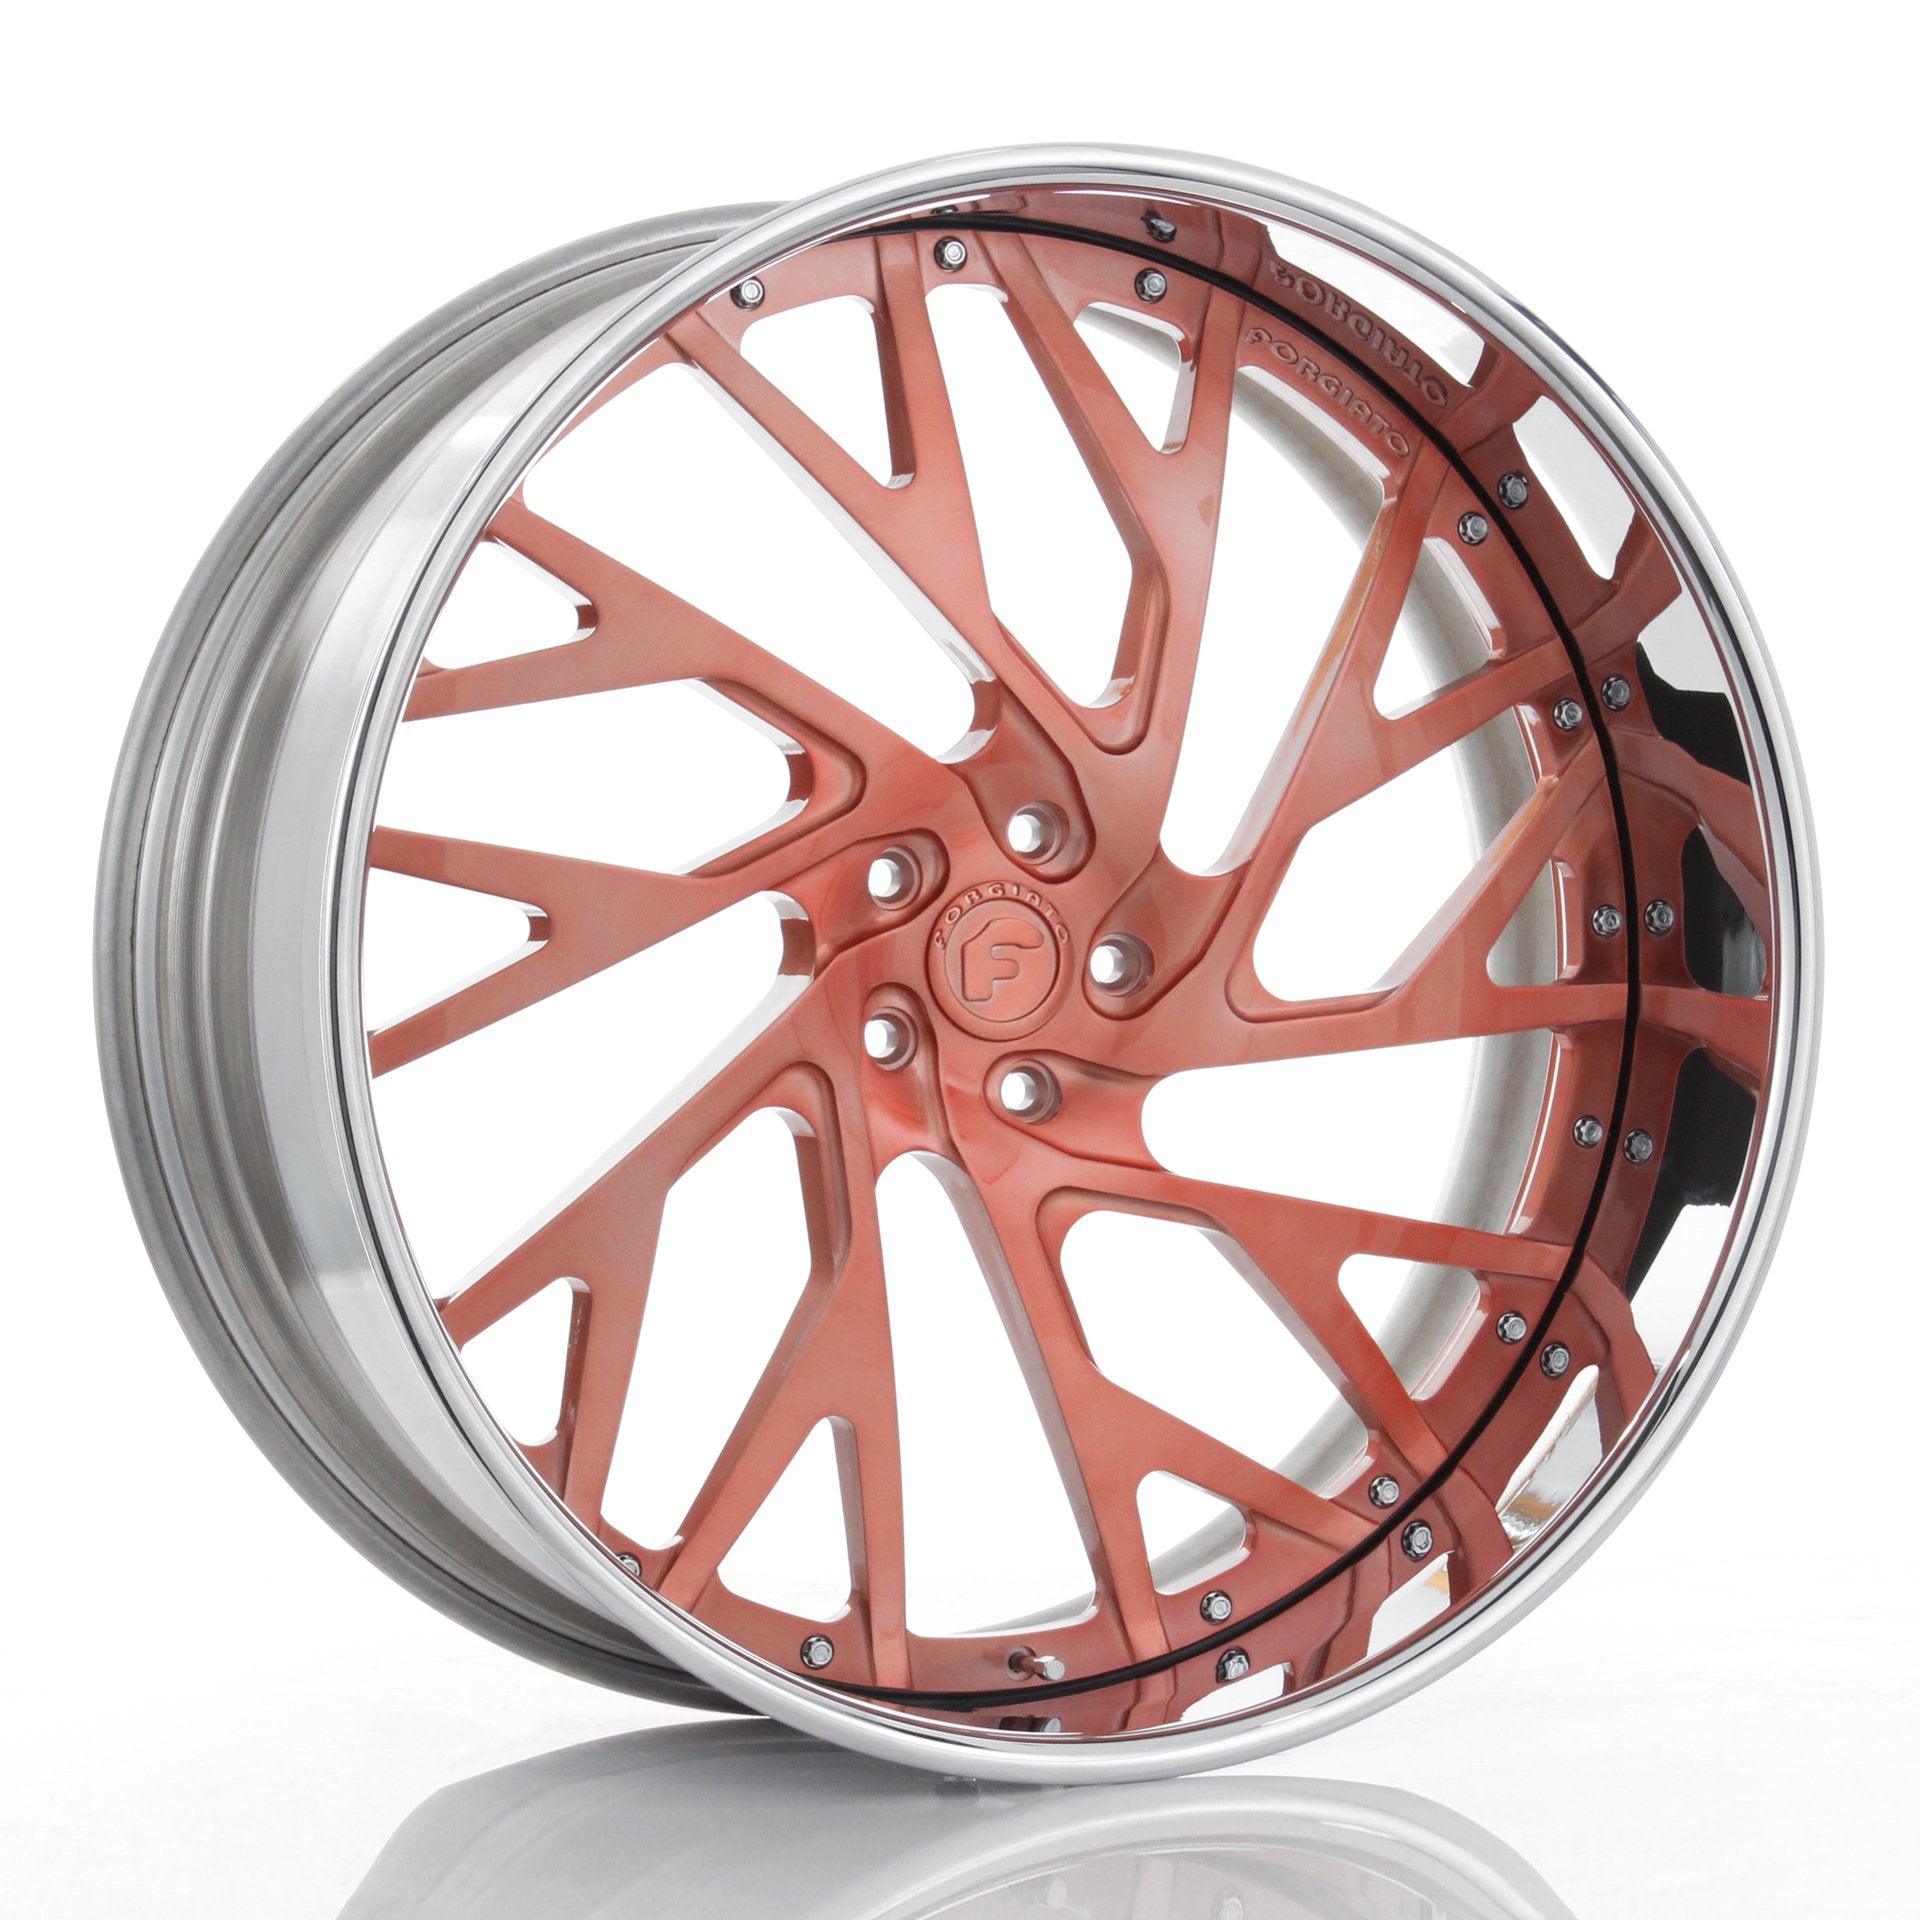 26" Set of Concentrati for 1983 Caprice (Flat Forging) - Wheels | Rims